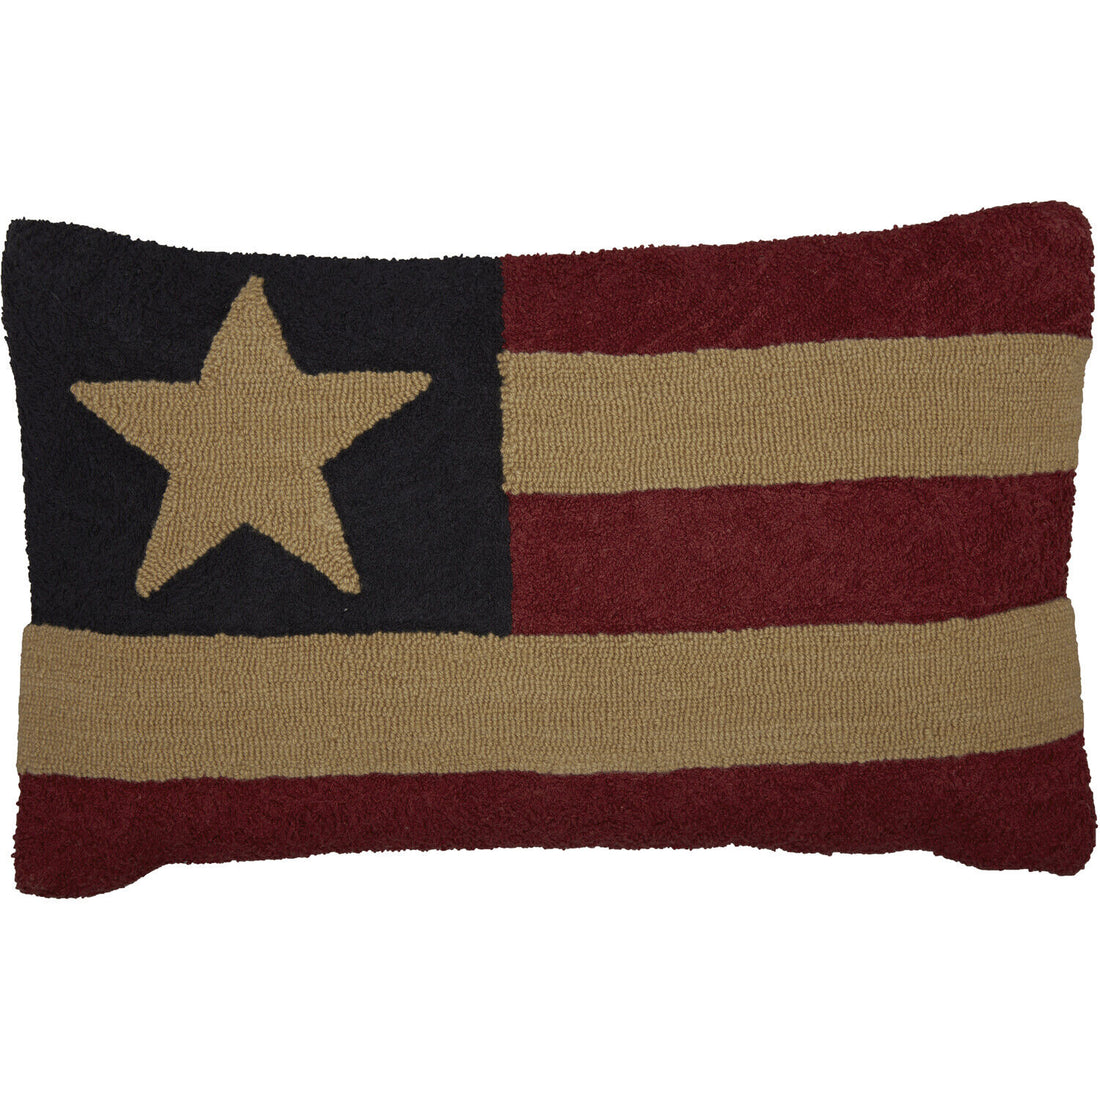 Primitive/Country Patriotic Flag Stars and Stripes Hooked Pillow 14x22 - The Primitive Pineapple Collection